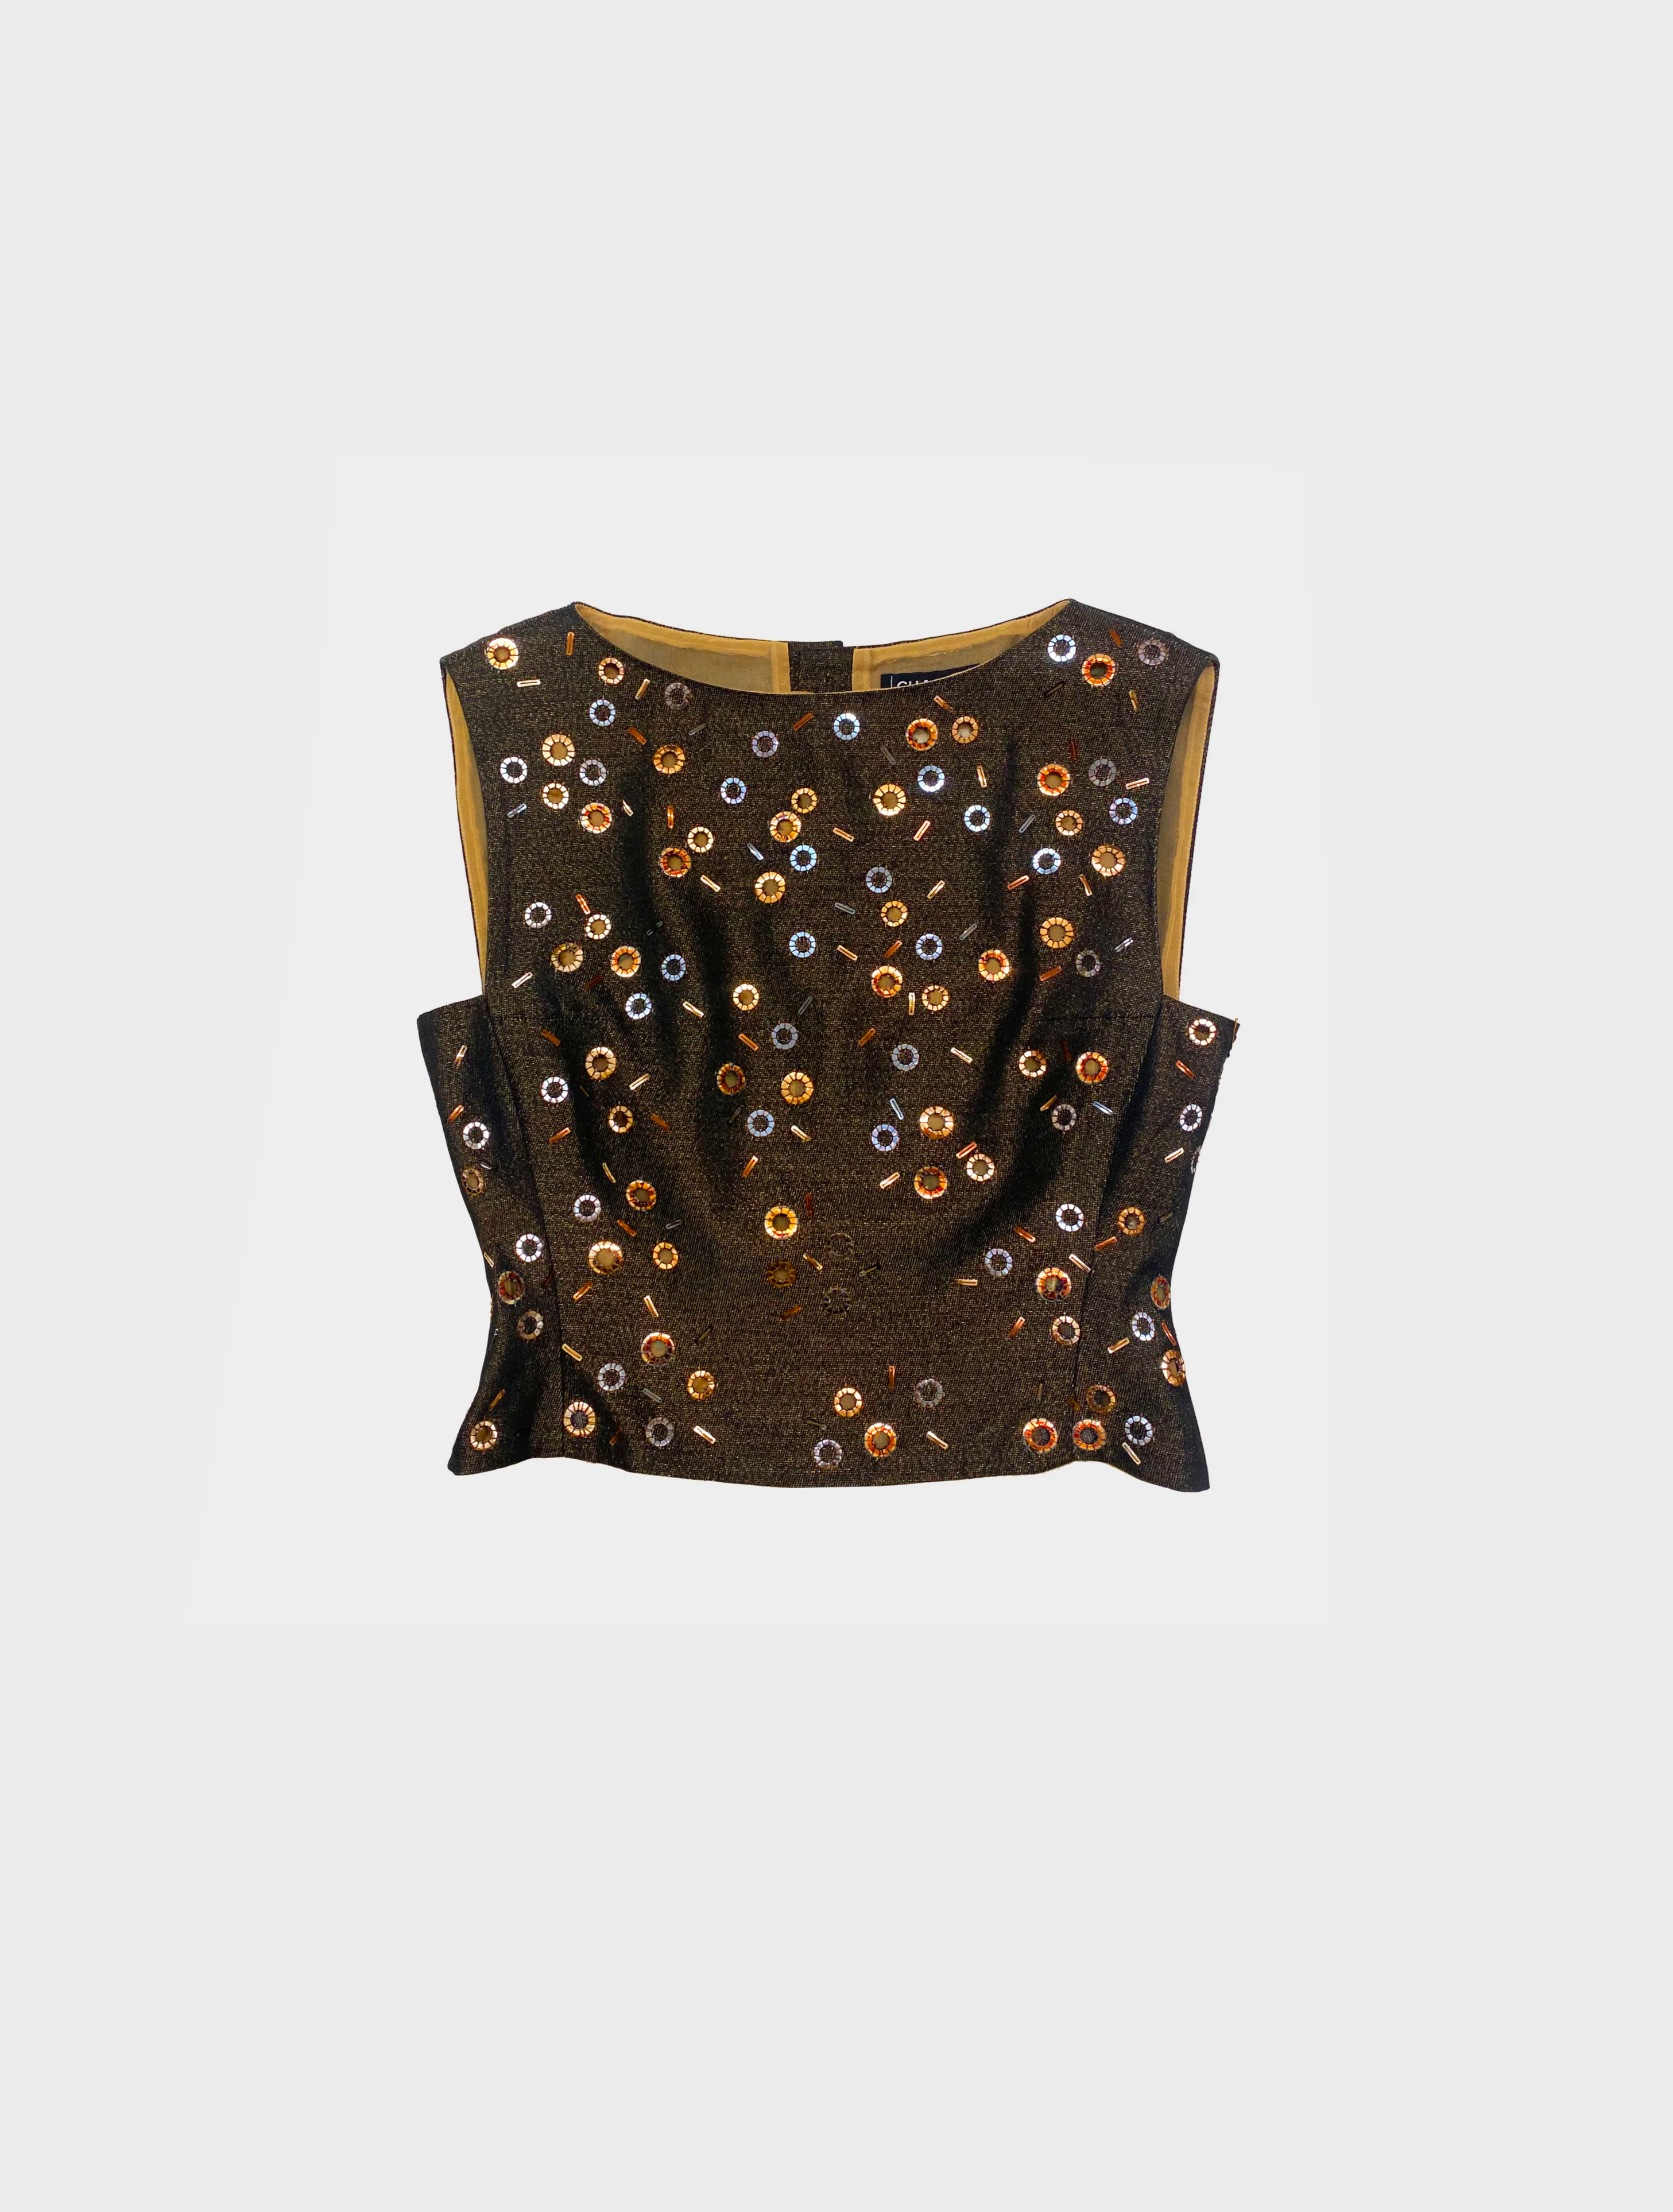 Chanel AW 2000 Brown Circle Sequin Top